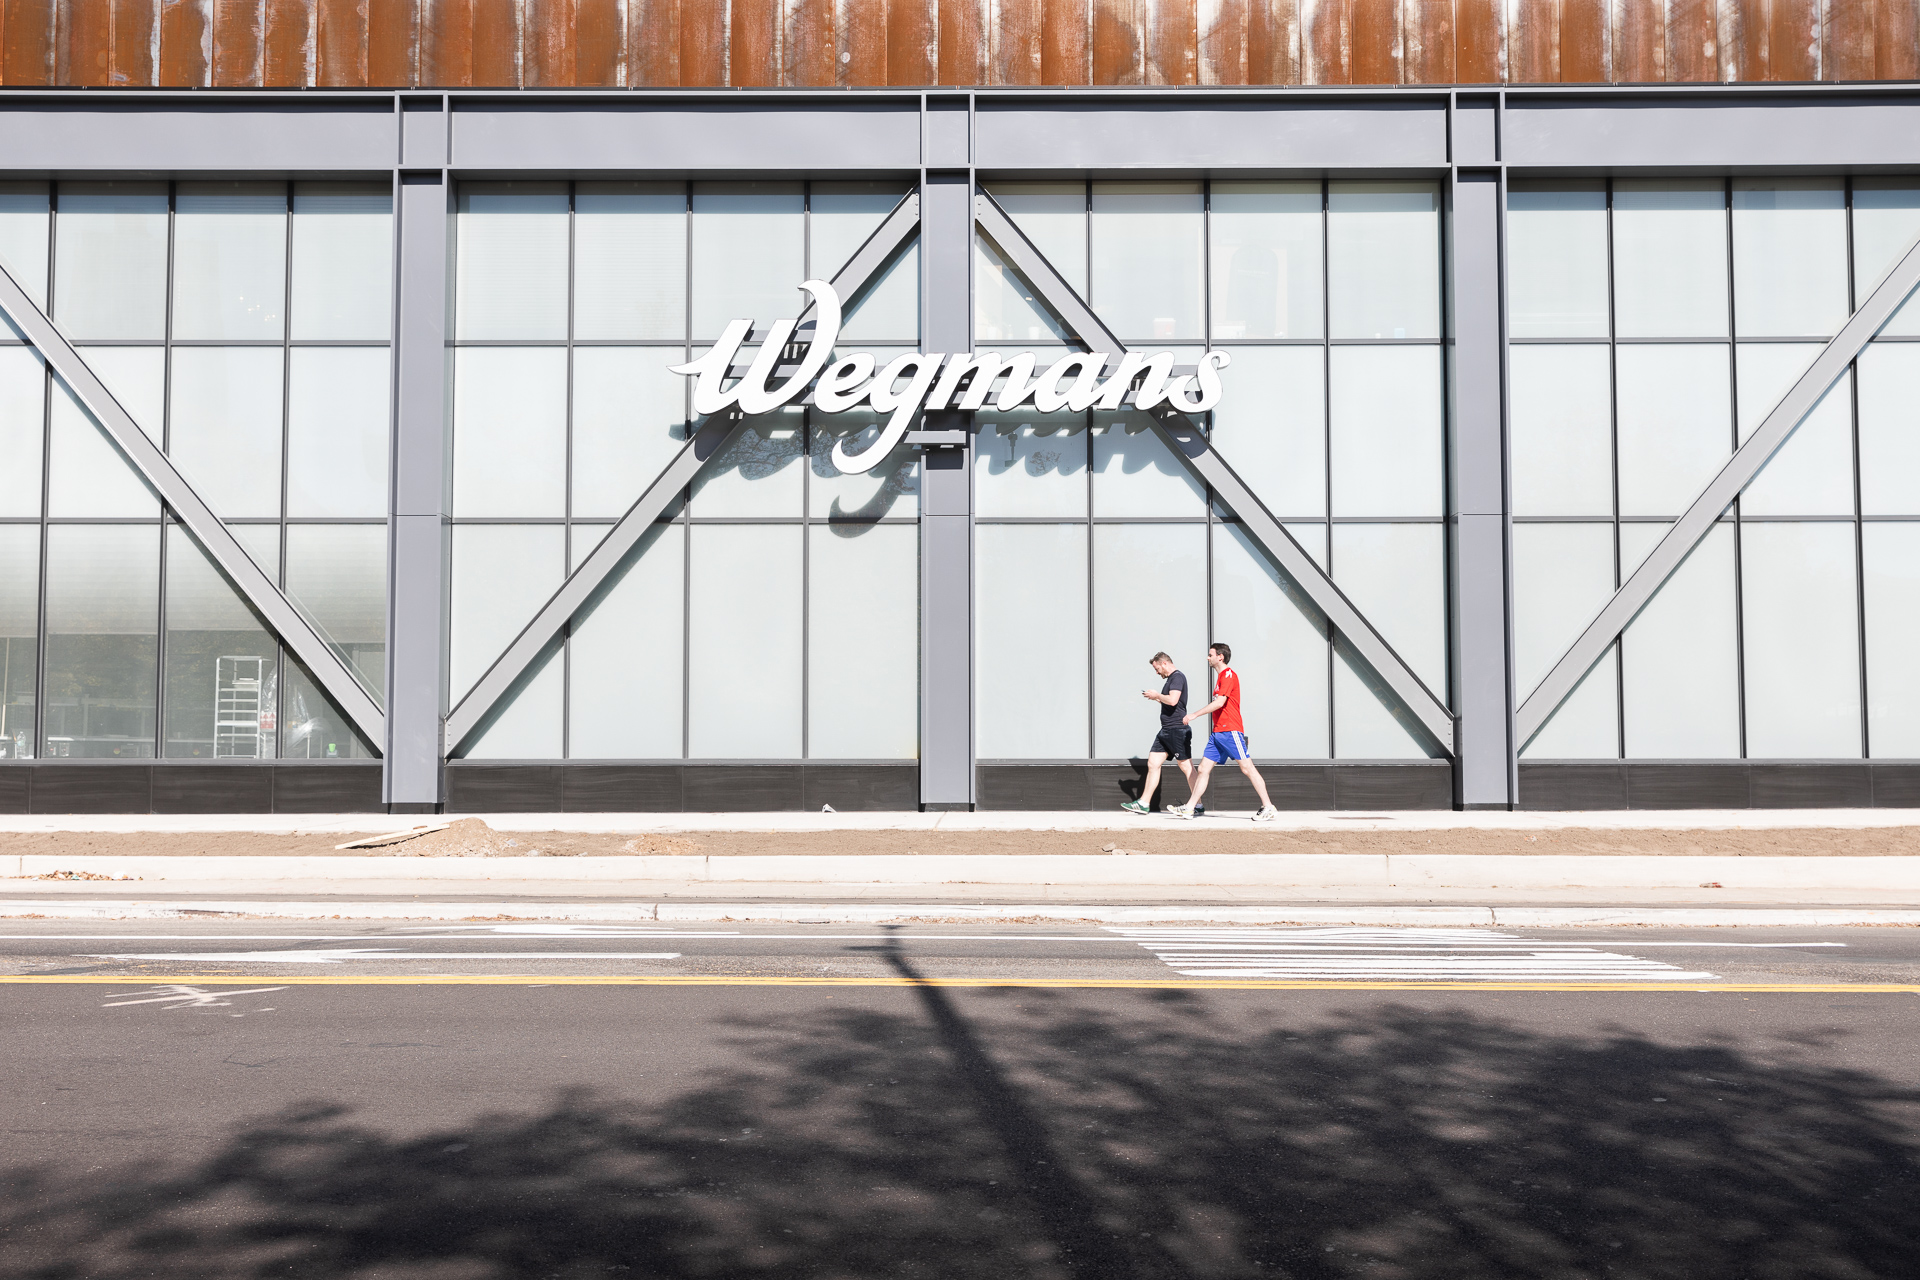 The Wegmans name looms large on the new store’s Flushing Avenue facade. Eagle photo by Paul Frangipane